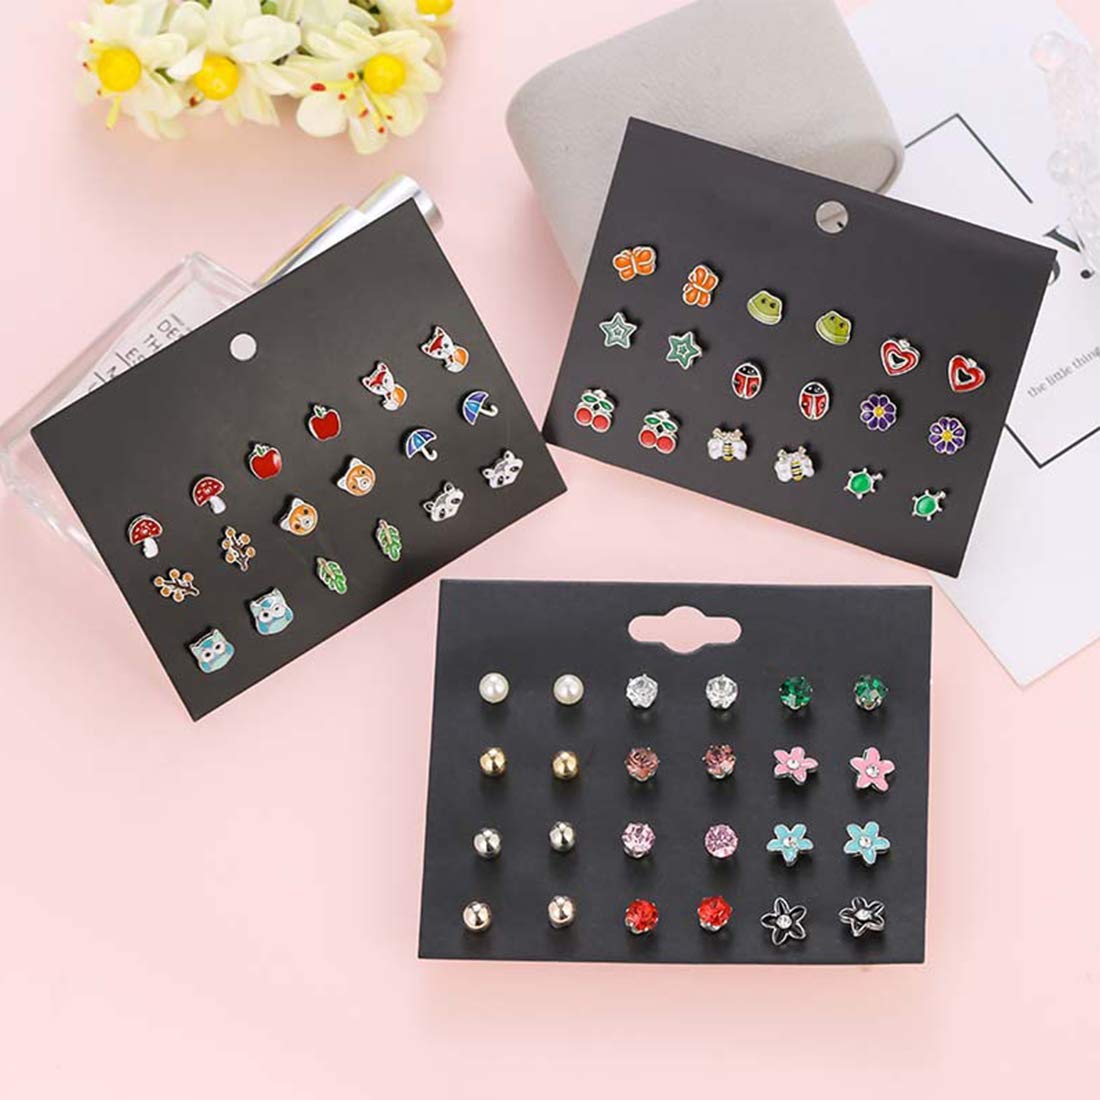 Melbees by Yellow Chimes Earrings for Women and Girls | Fashion Multicolor Studs | Silver Toned Small Stud Earring Set | Westeren stud Earrings Combo| Accessories Jewellery for Women | Birthday Gift for Girls and Women Anniversary Gift for Wife